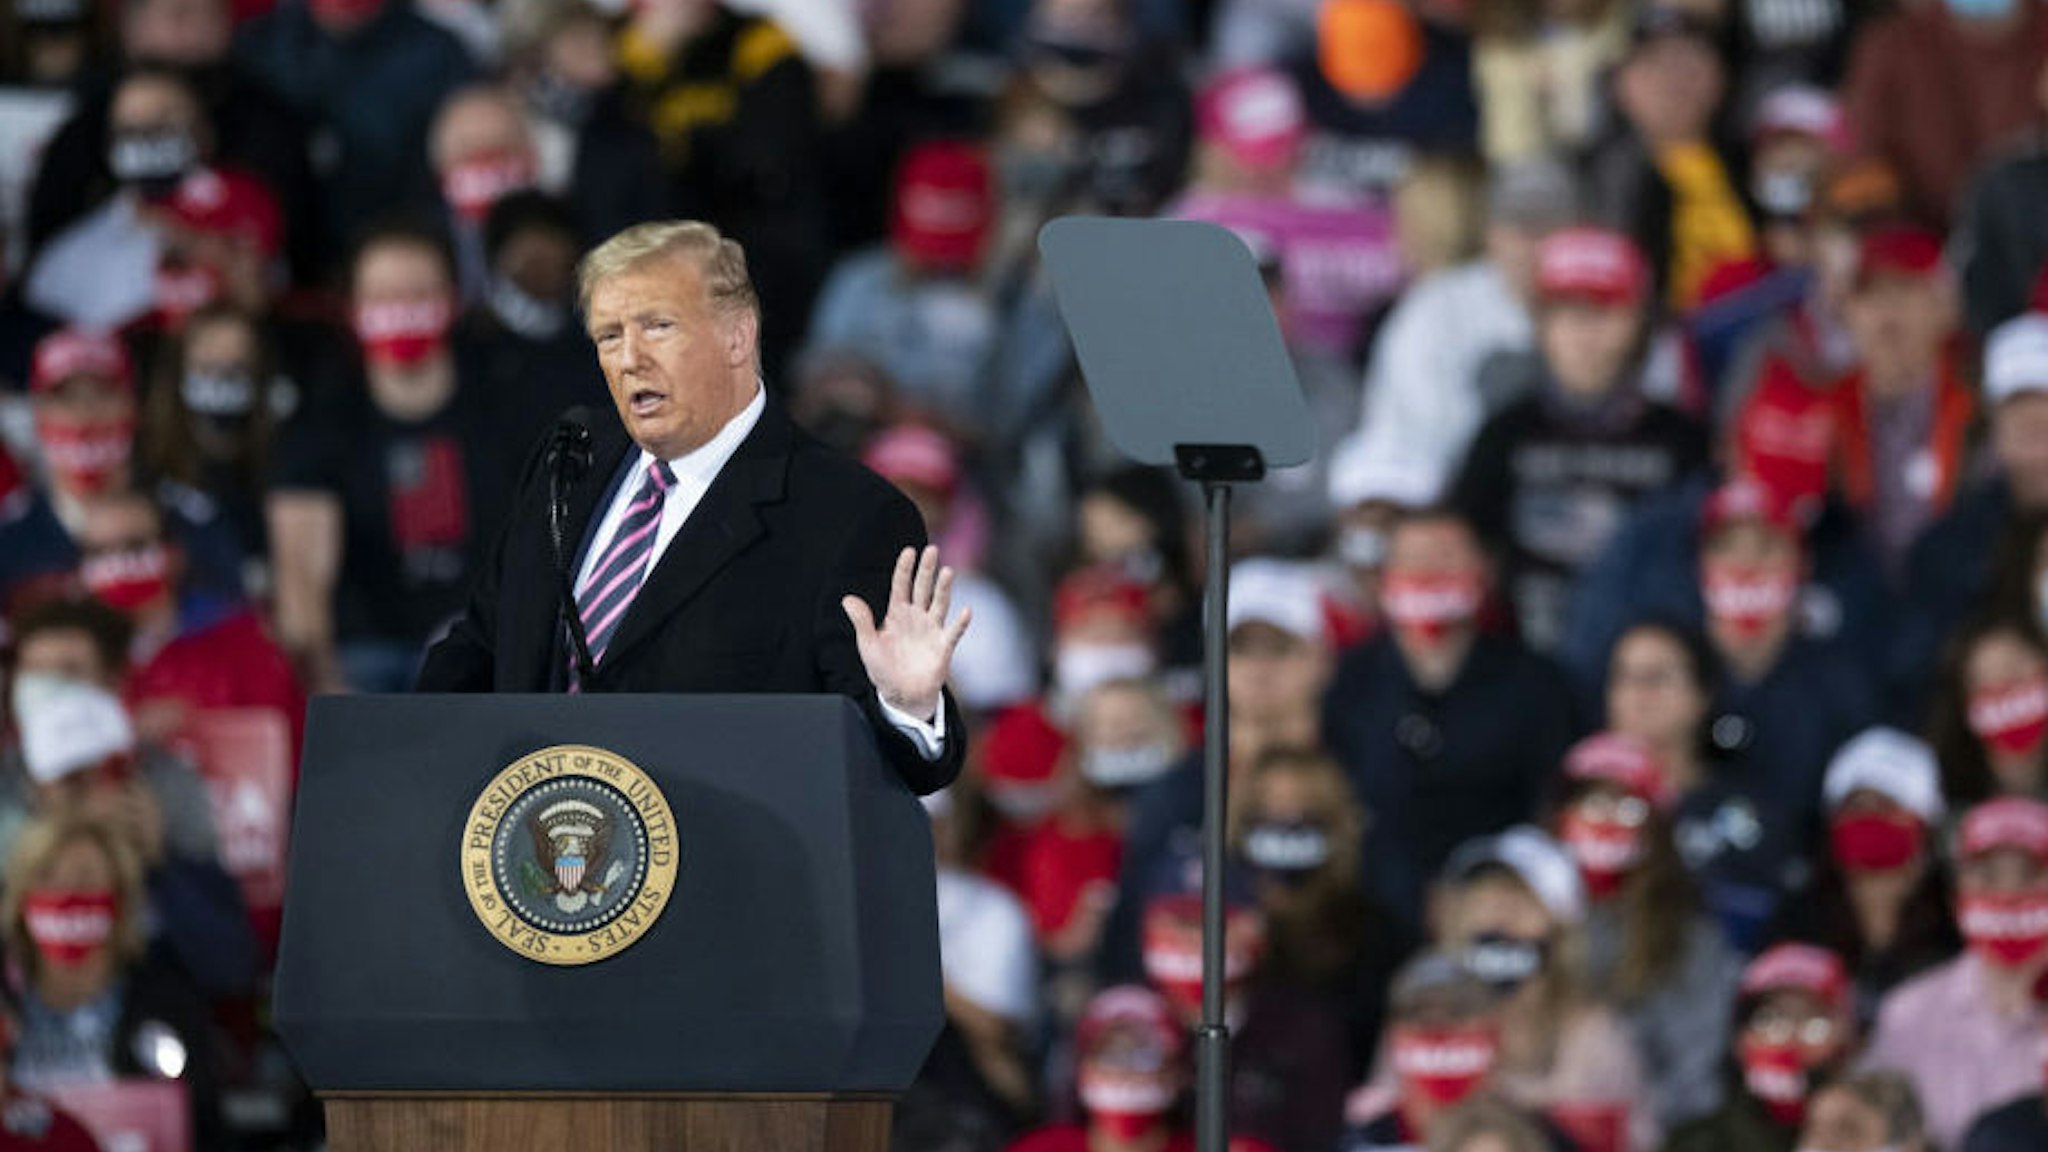 U.S. President Donald Trump speaks during a 'Make America Great Again' campaign rally in Moon Township, Pennsylvania, U.S., on Tuesday, Sept. 22, 2020. Trump's plan to replace the late Justice Ruth Bader Ginsburg on the U.S. Supreme Court gained momentum on Tuesday after Senate Republicans all but quashed Democrats hopes of stalling a nominee until Inauguration Day. Photographer: Michael Swensen/Bloomberg